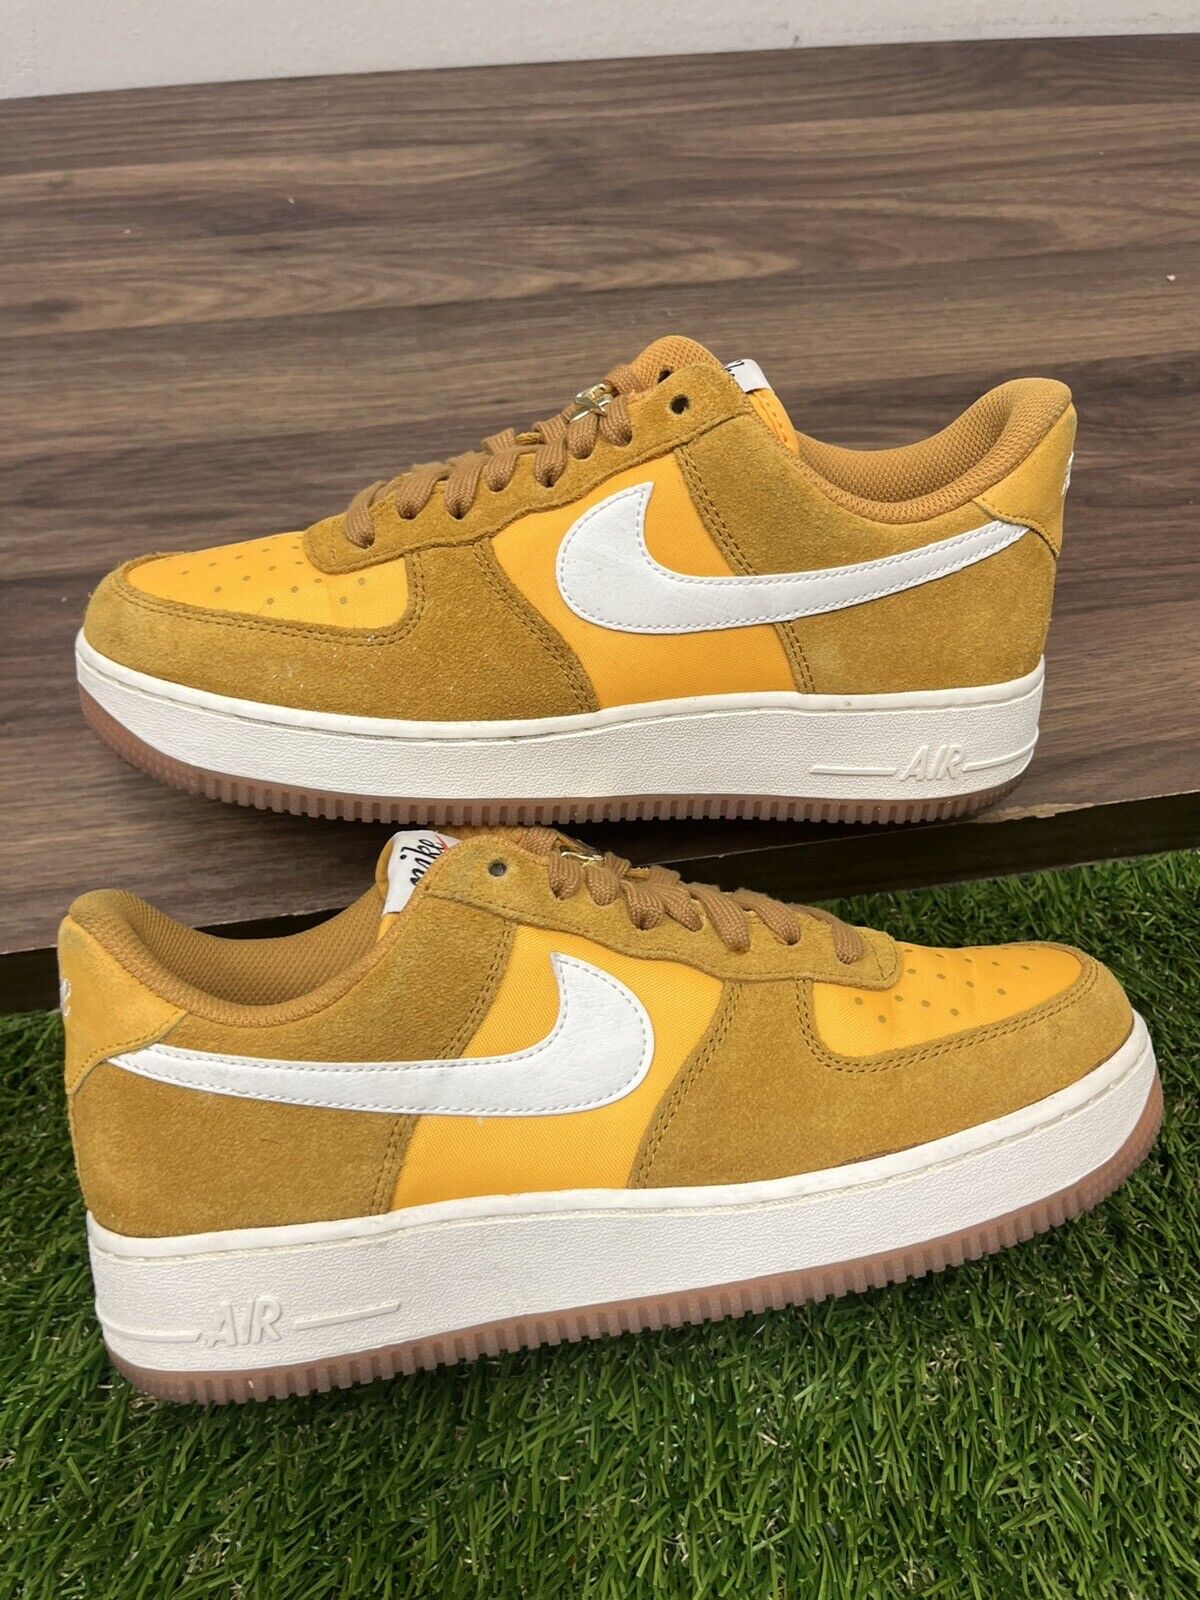 Nike Air Force 1 ‘07 SE First Use Gold Yellow Suede DA8302-700 Women’s Size 10.5